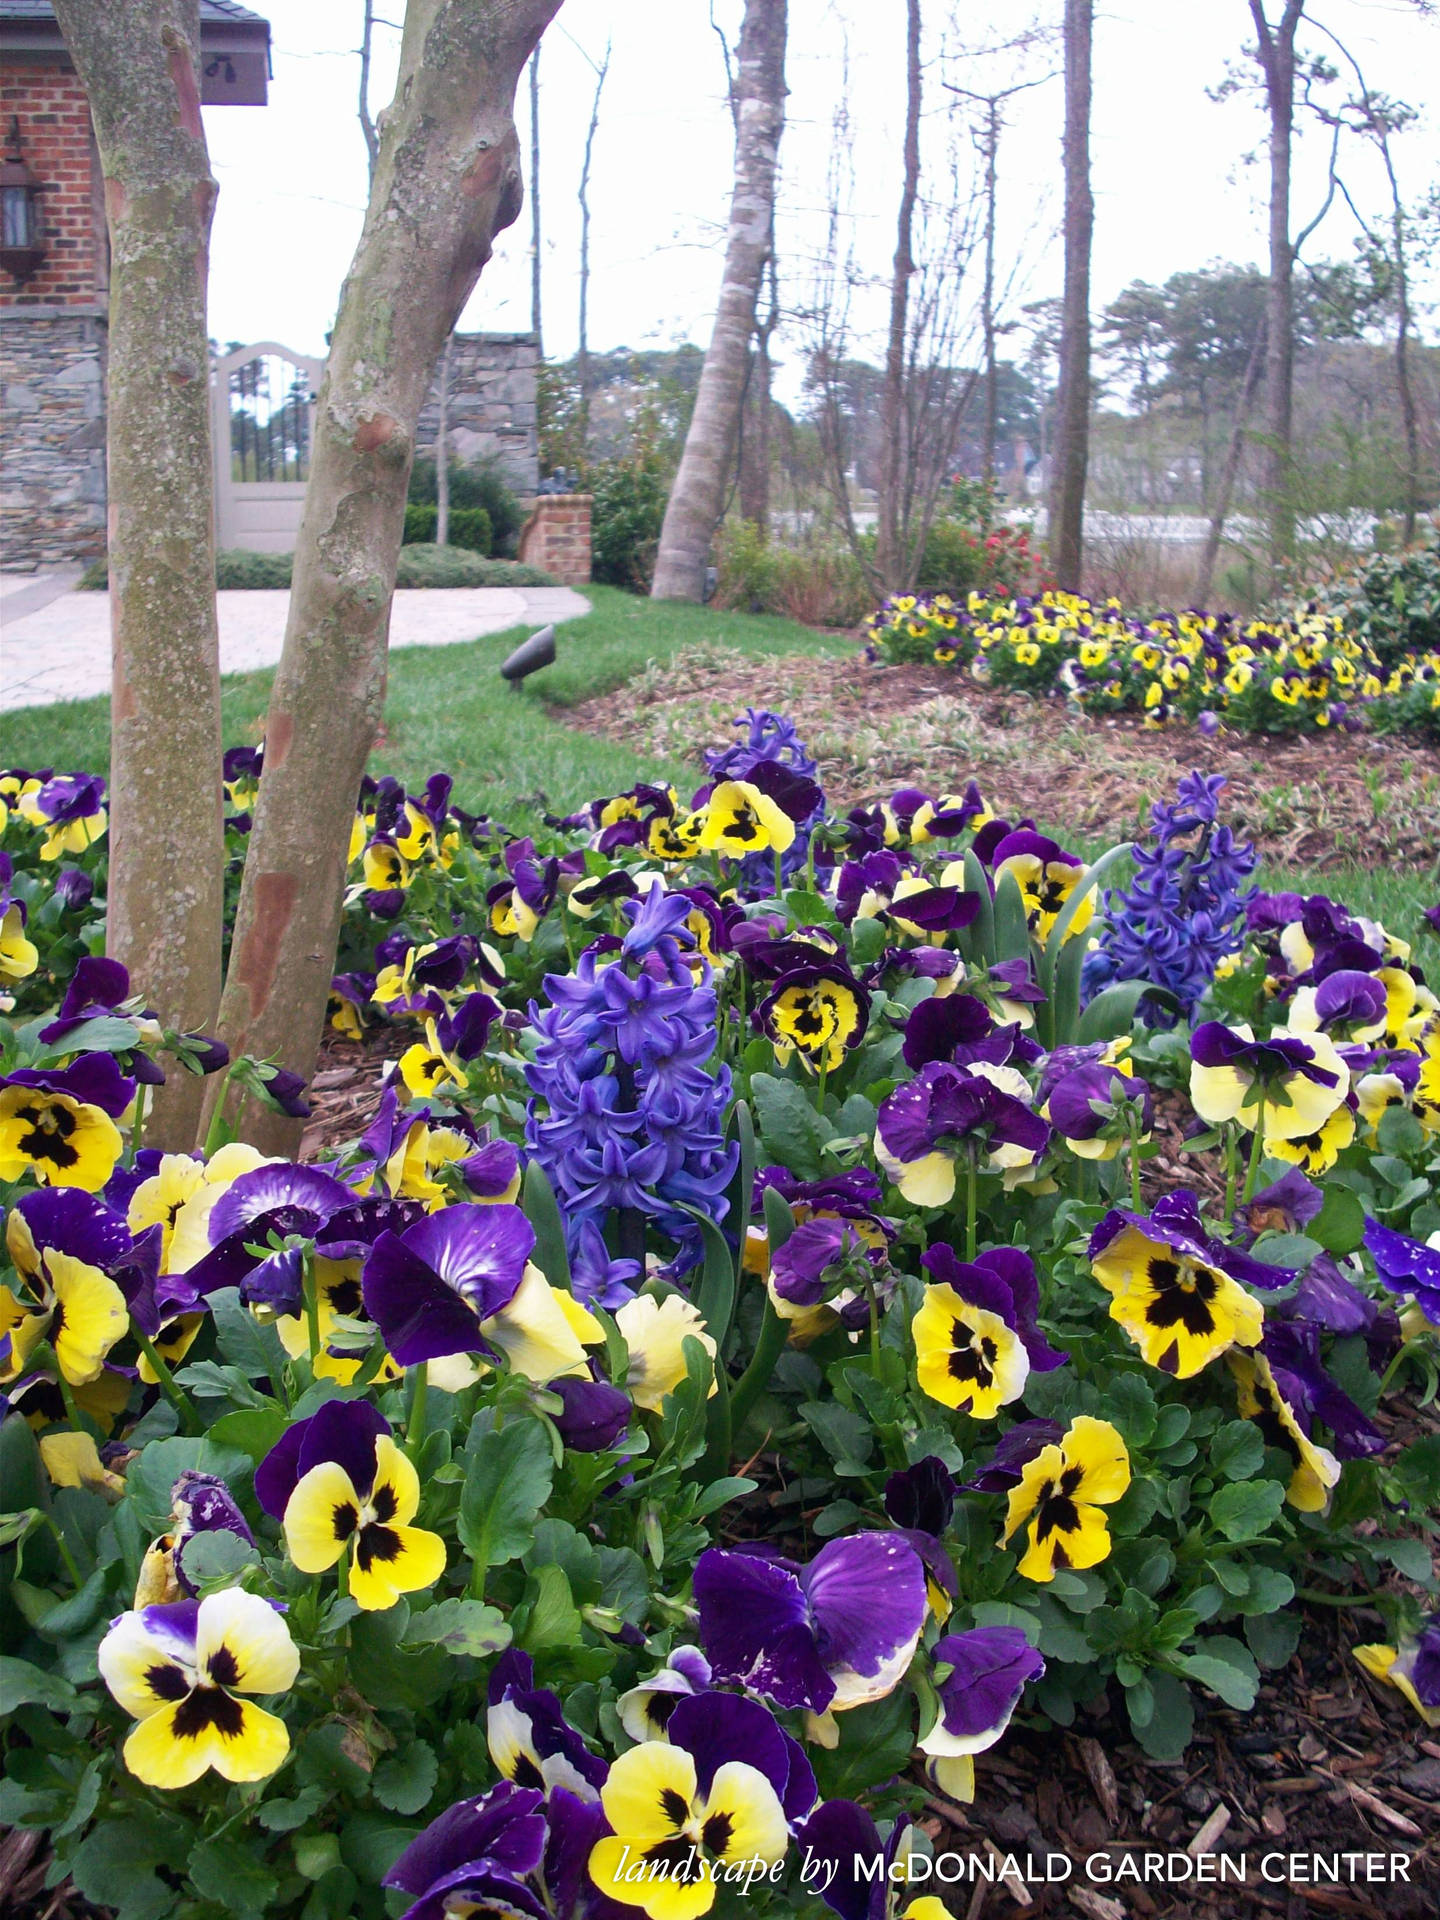 Captivating Beauty Of Blooming Pansies Wallpaper